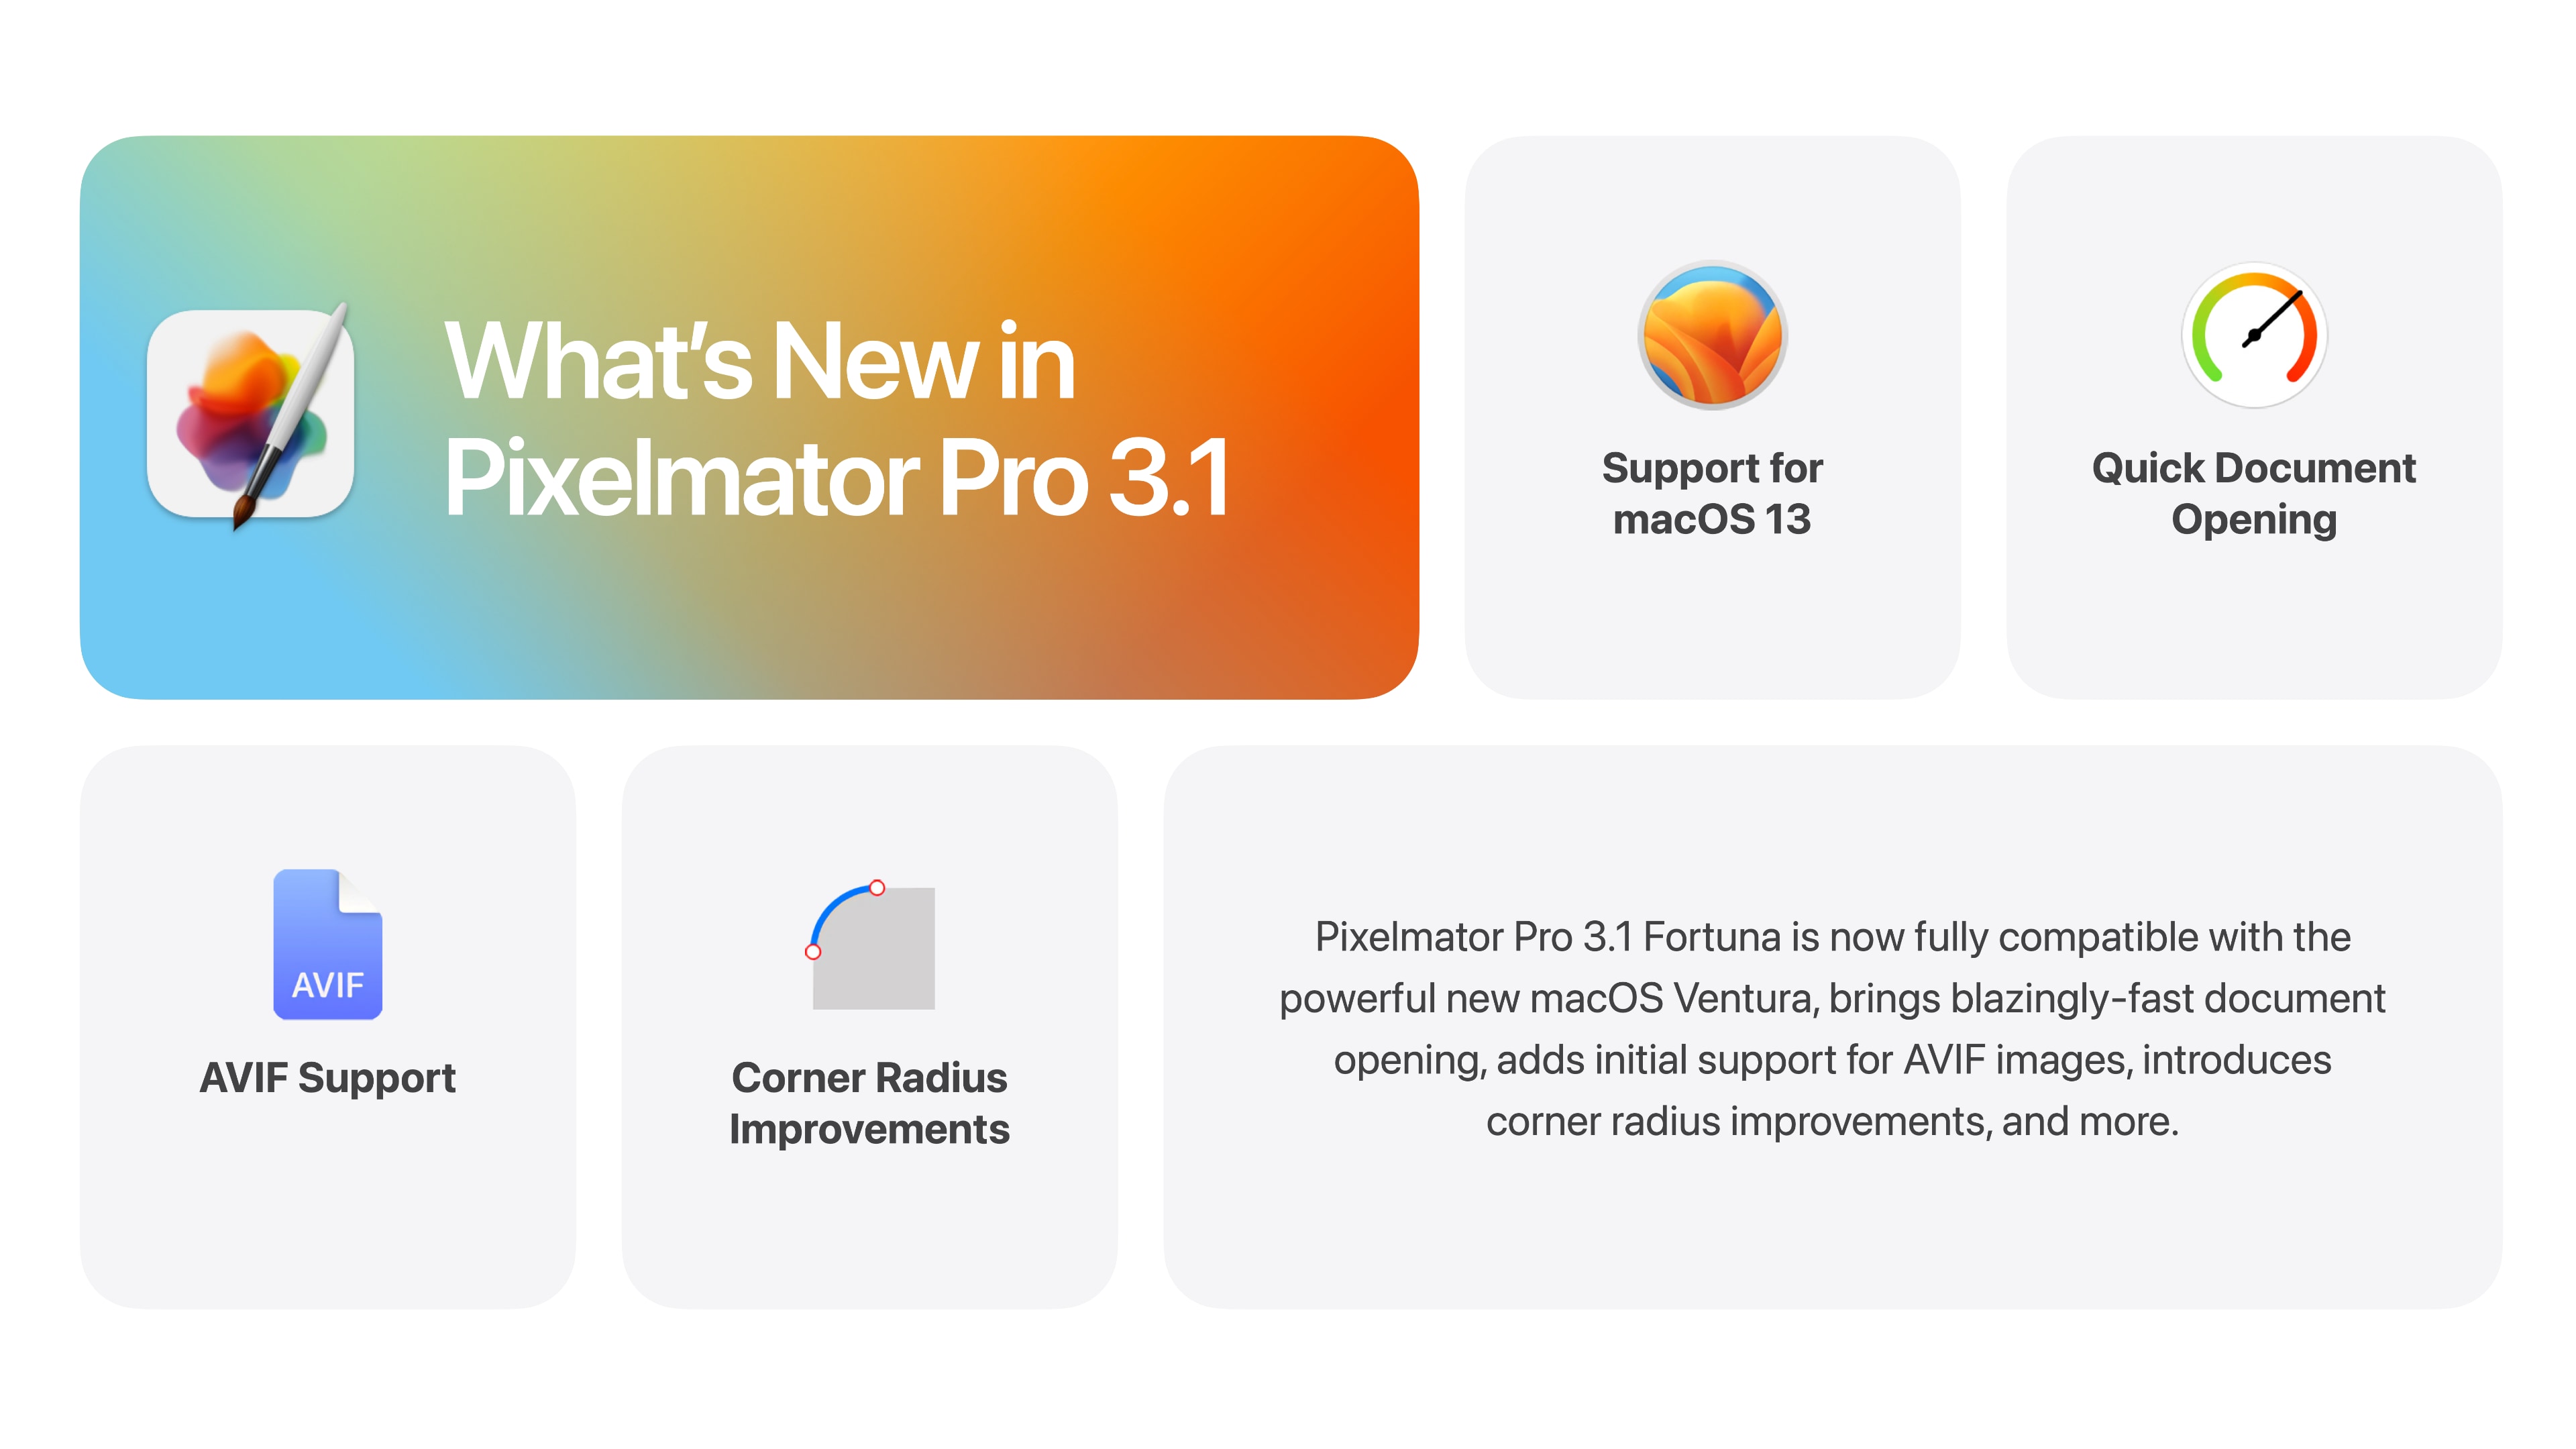 Infographic showcasing the key new features in Pixelmator Pro 3.1 for macOS